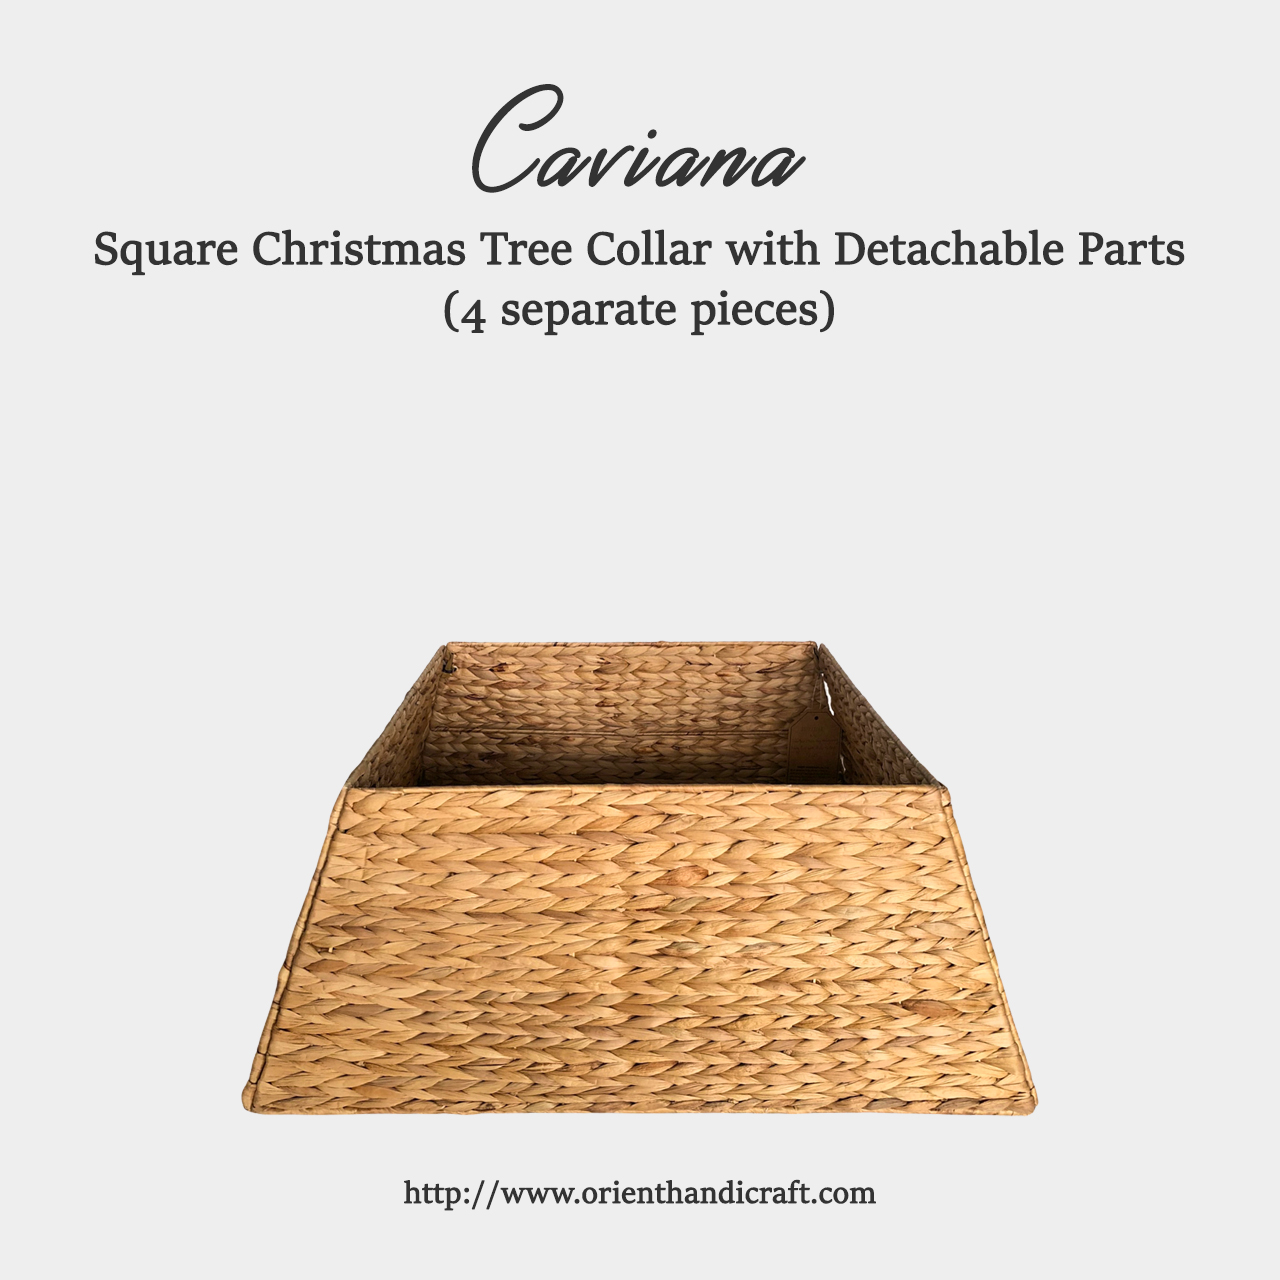 Square Christmas Tree Collar with Detachable Parts